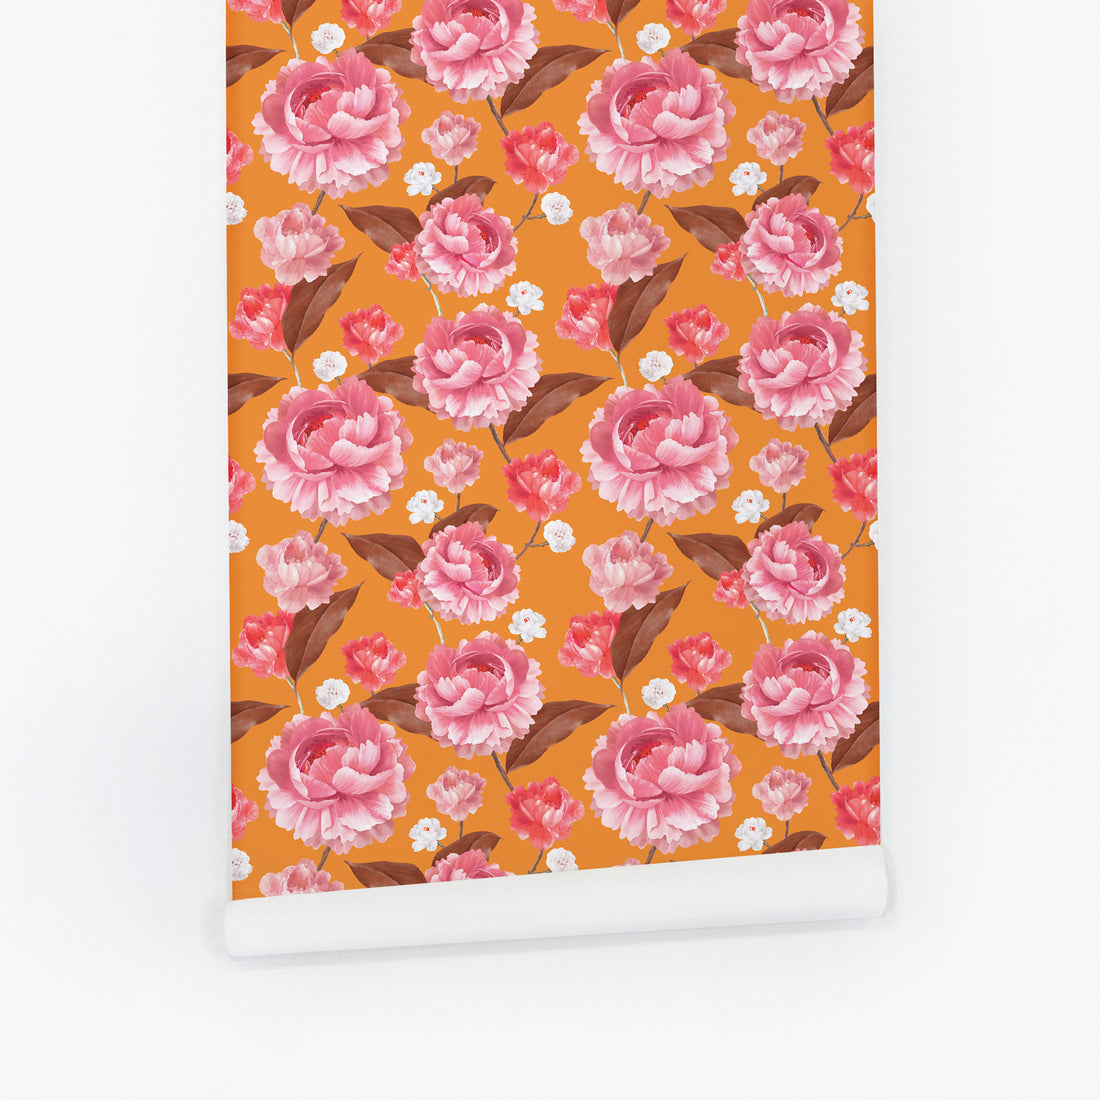 Colorful floral design removable wallpaper with orange and pink tones